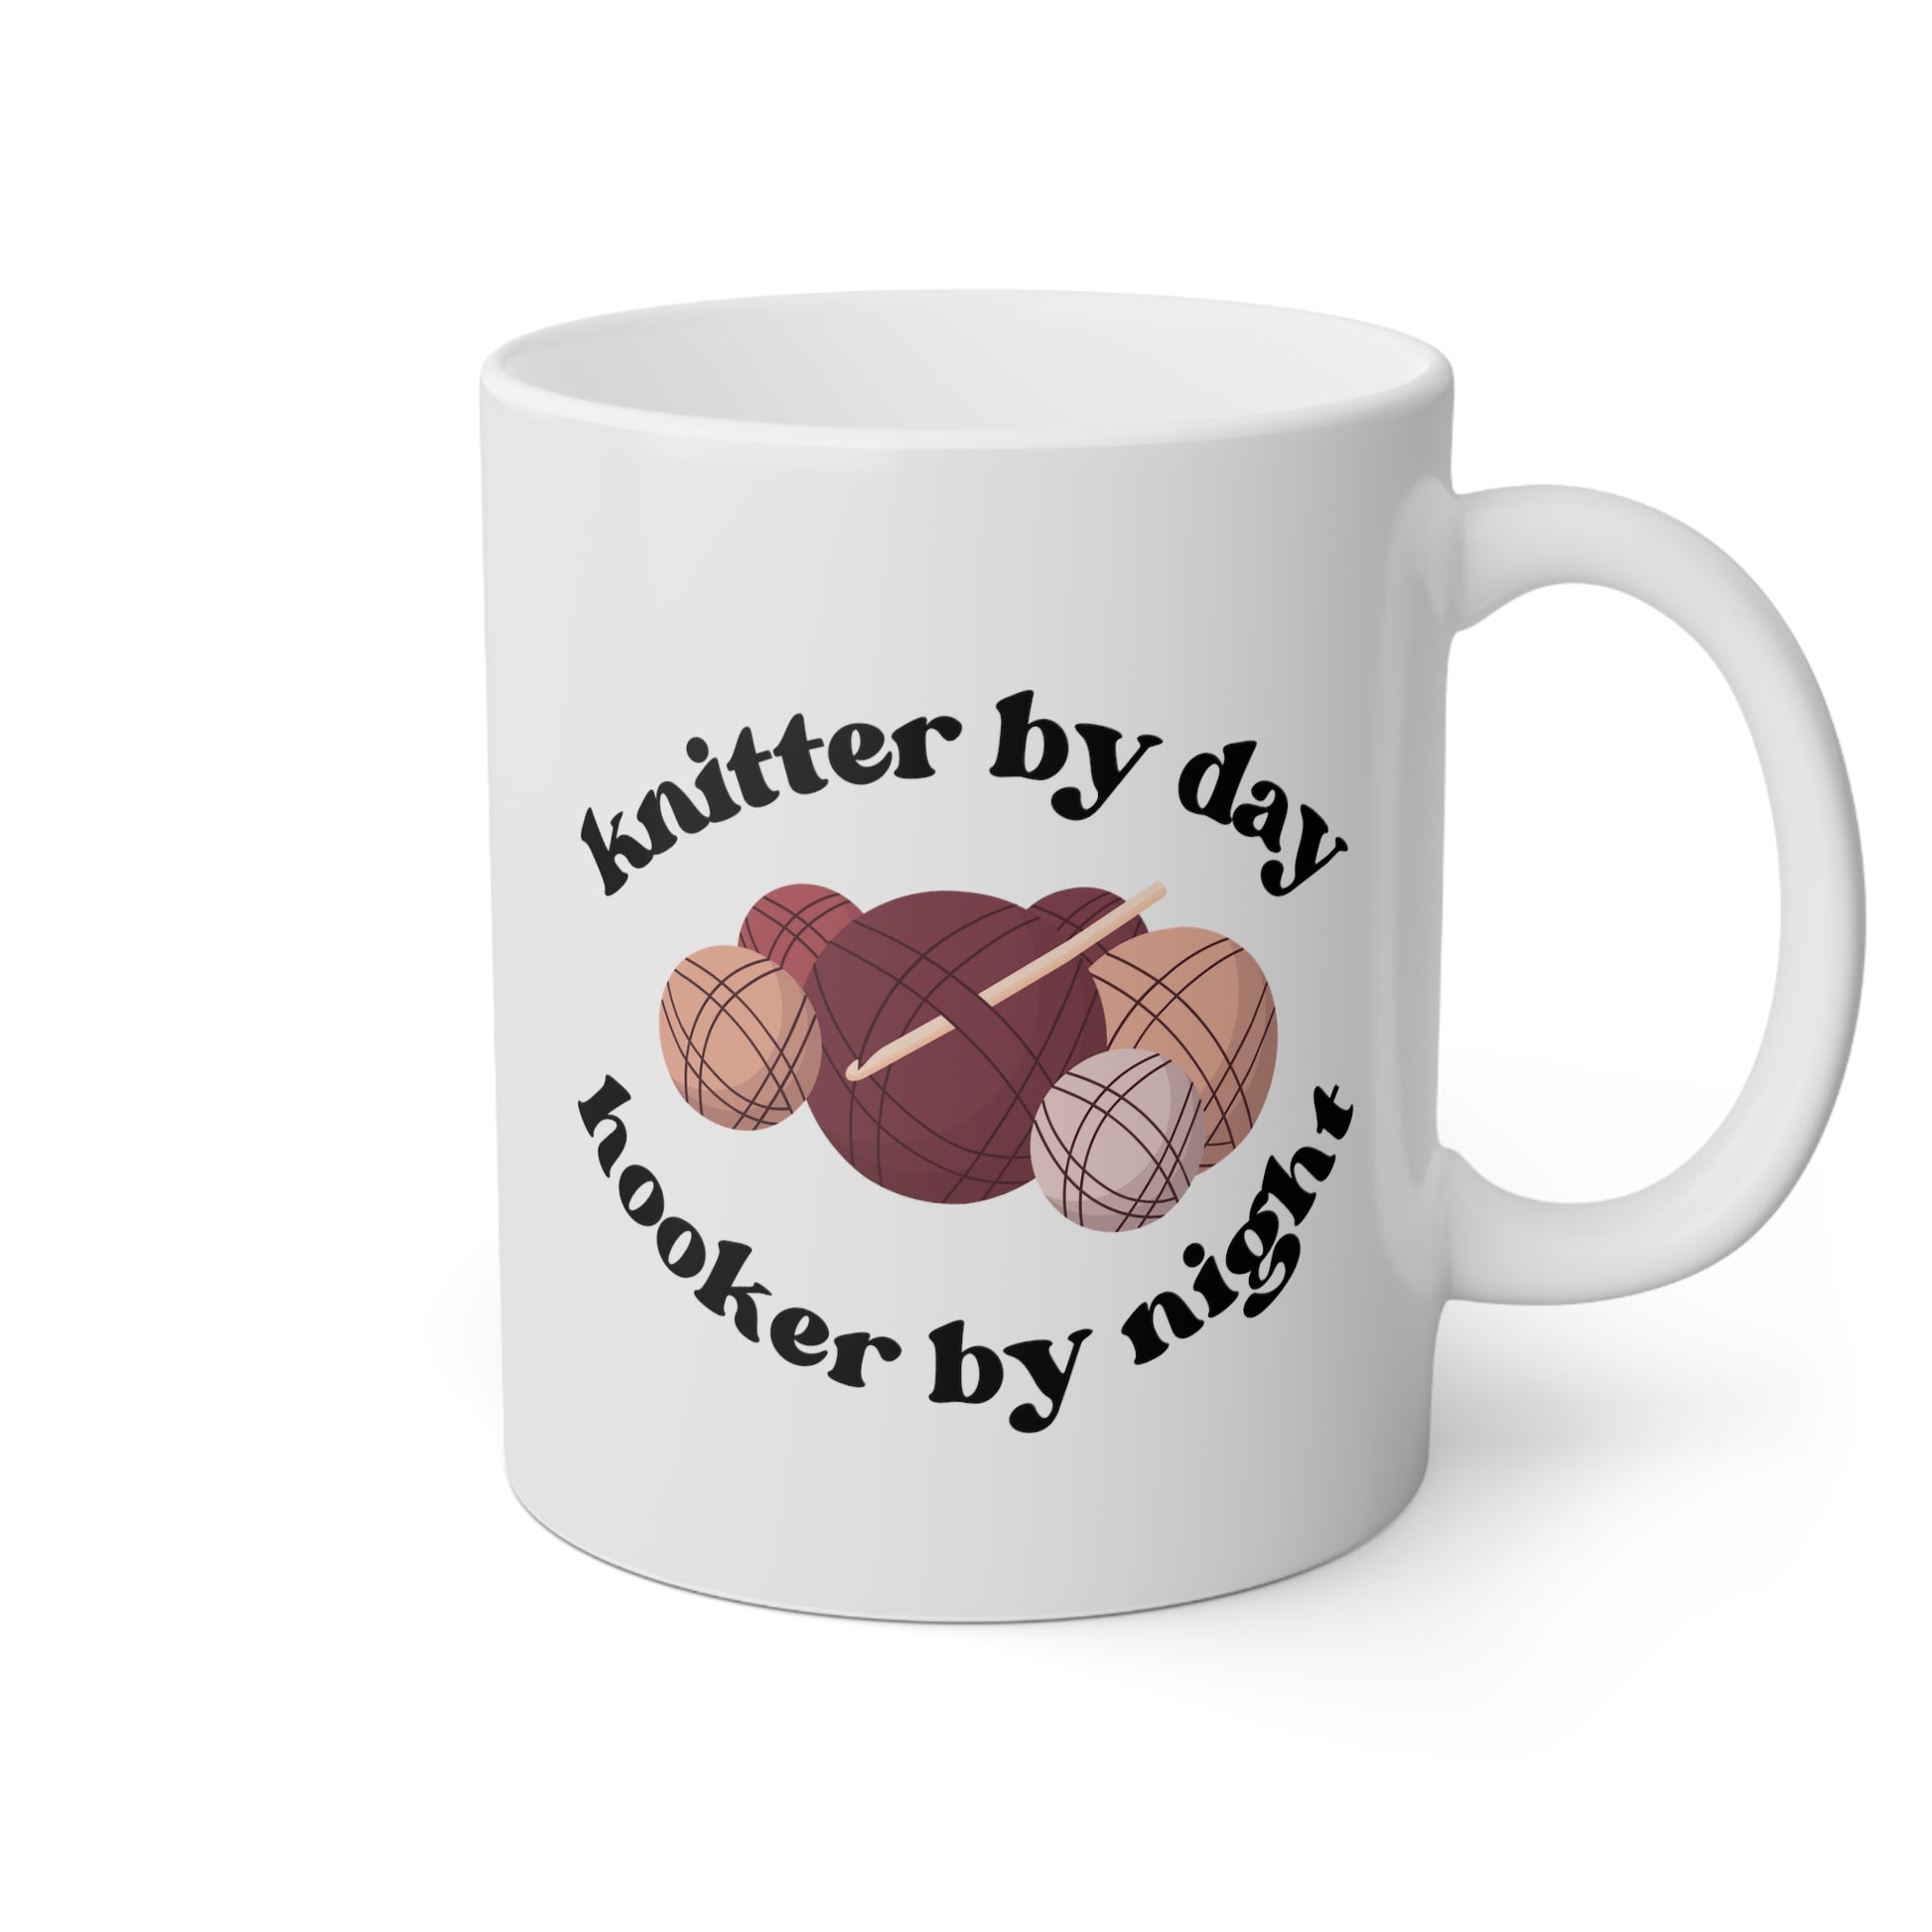 Knitter By Day Hooker By Night 11oz white funny large coffee mug gift for mom mother's day wool knitting novelty rude joke waveywares wavey wares wavywares wavy wares